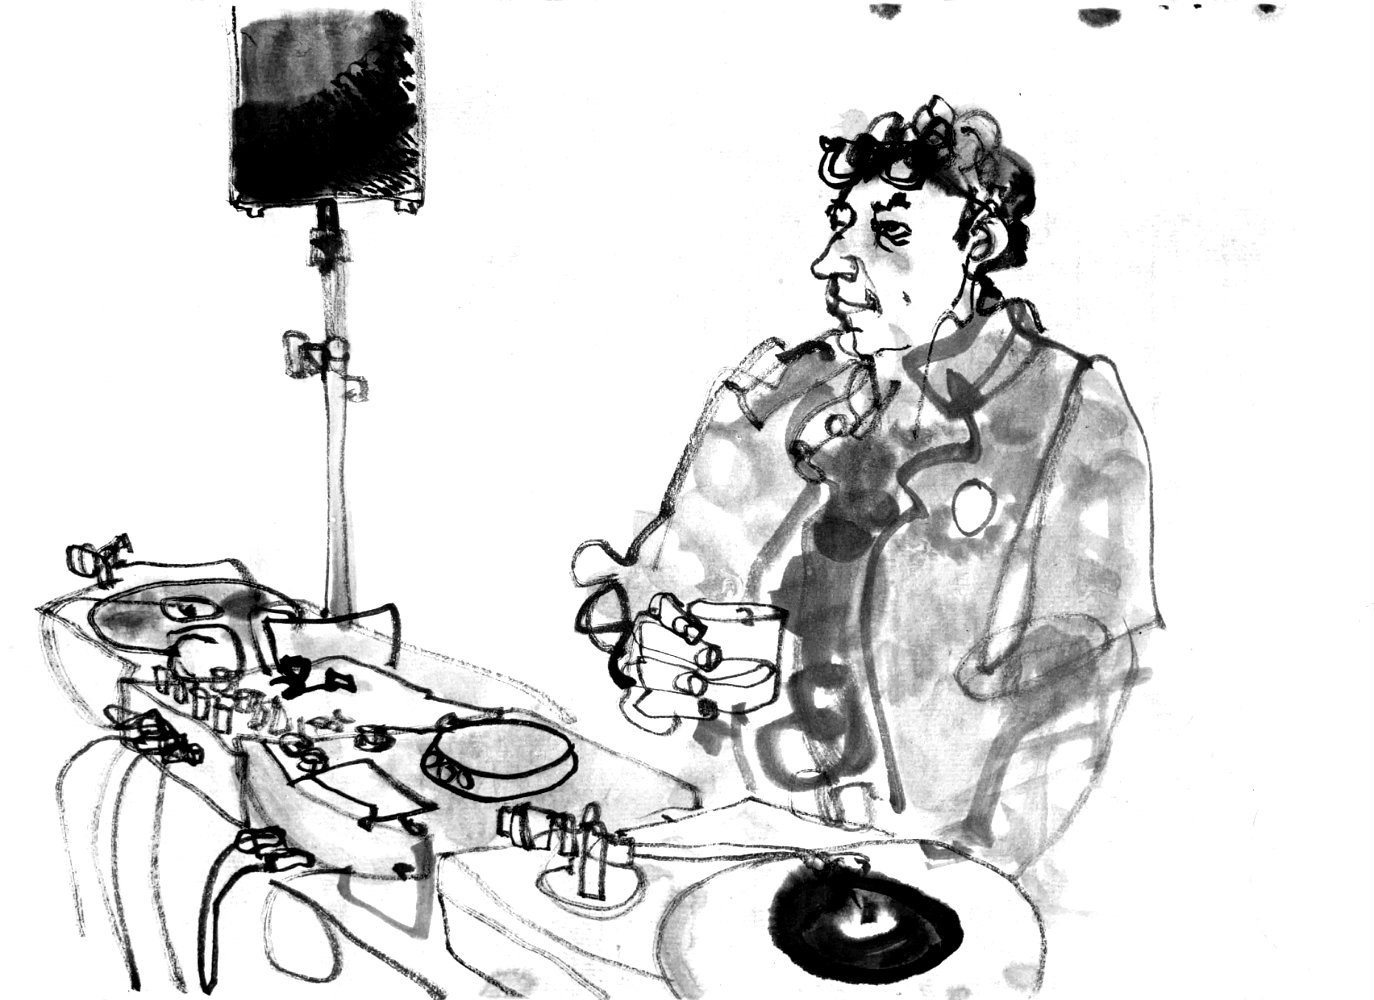 Ink drawing of a male dj, standing behind a desk with turntables (vinyl single playing), whiskey glas in hand.